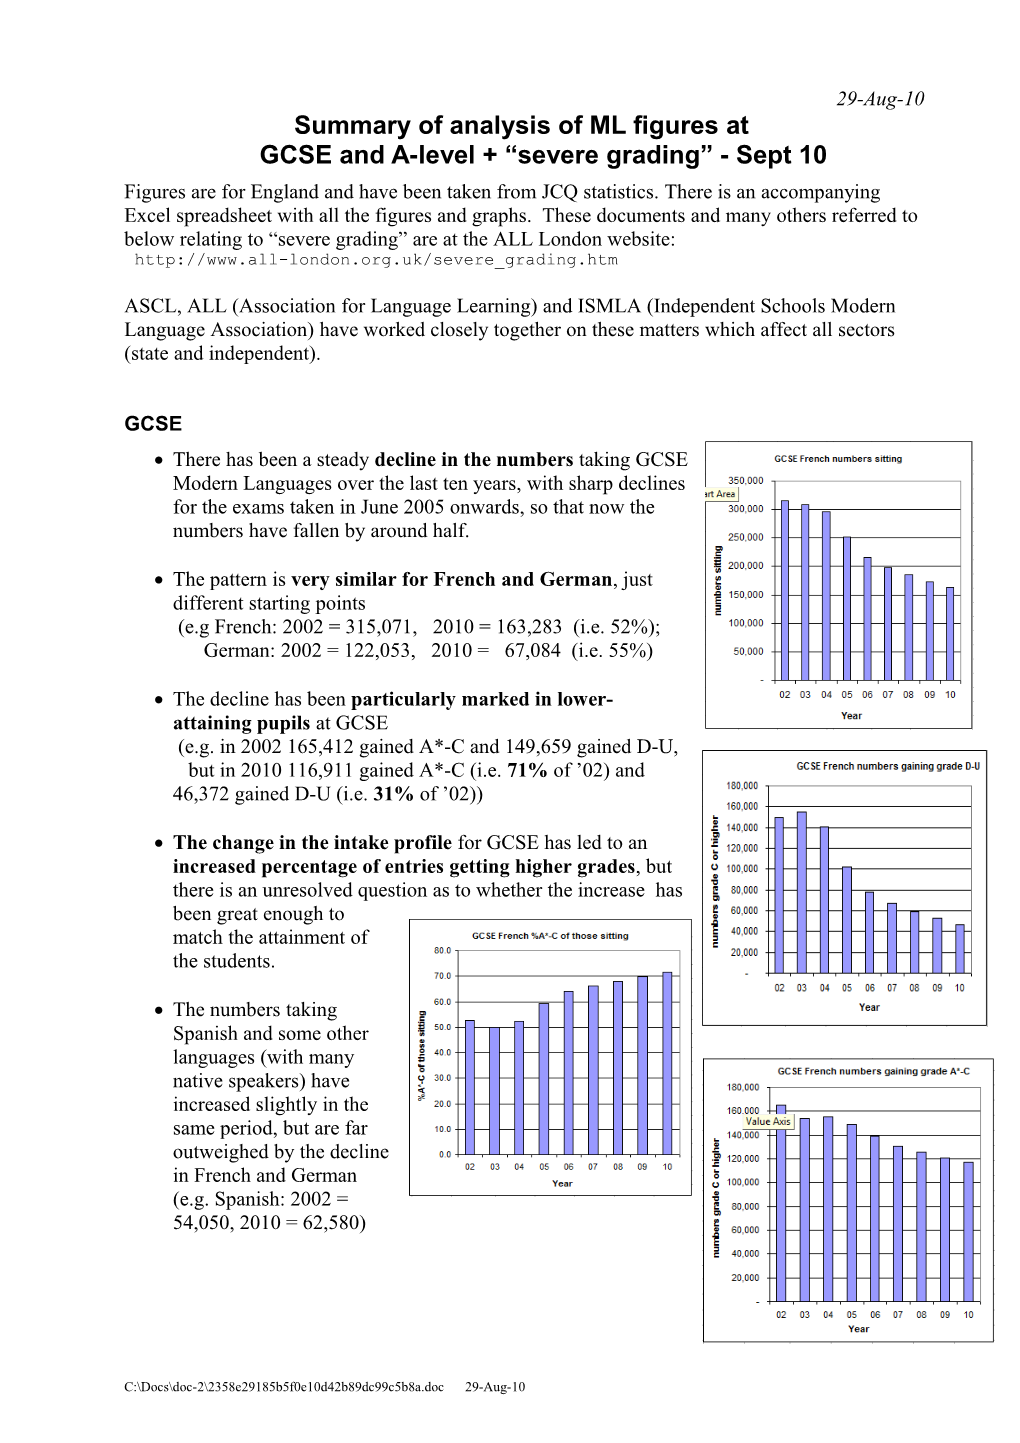 Summary of Analysis of ML Figures at GCSE and Alevel Sept 10